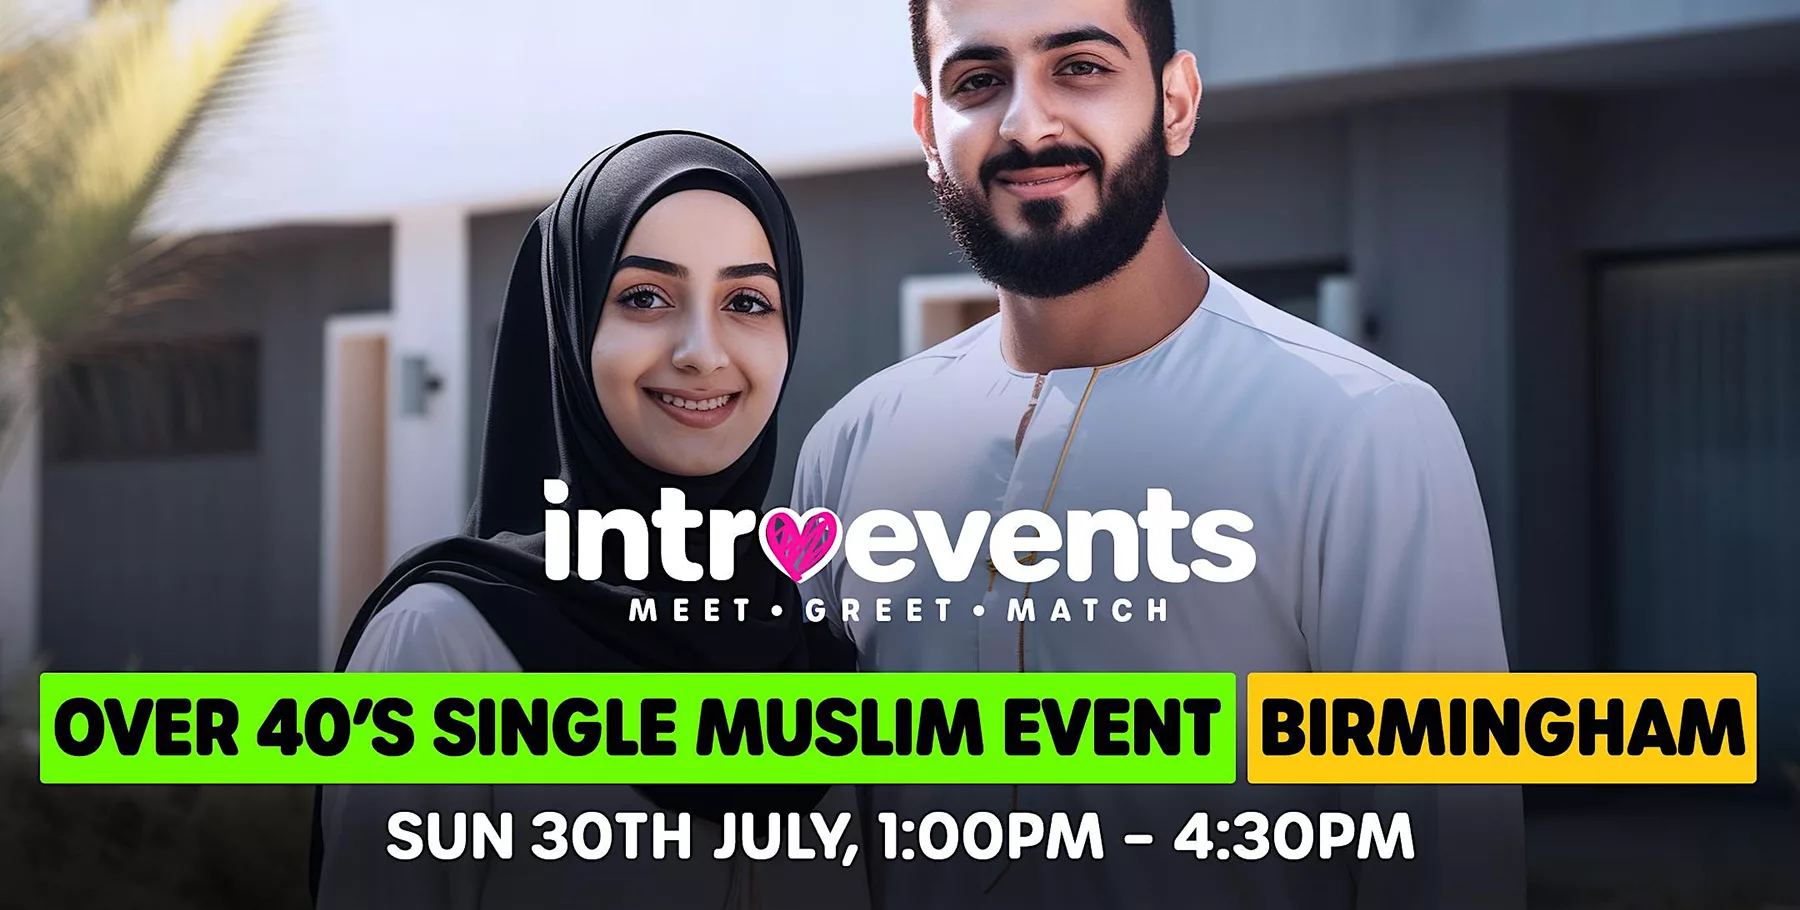 Muslim marriage events for over 40s